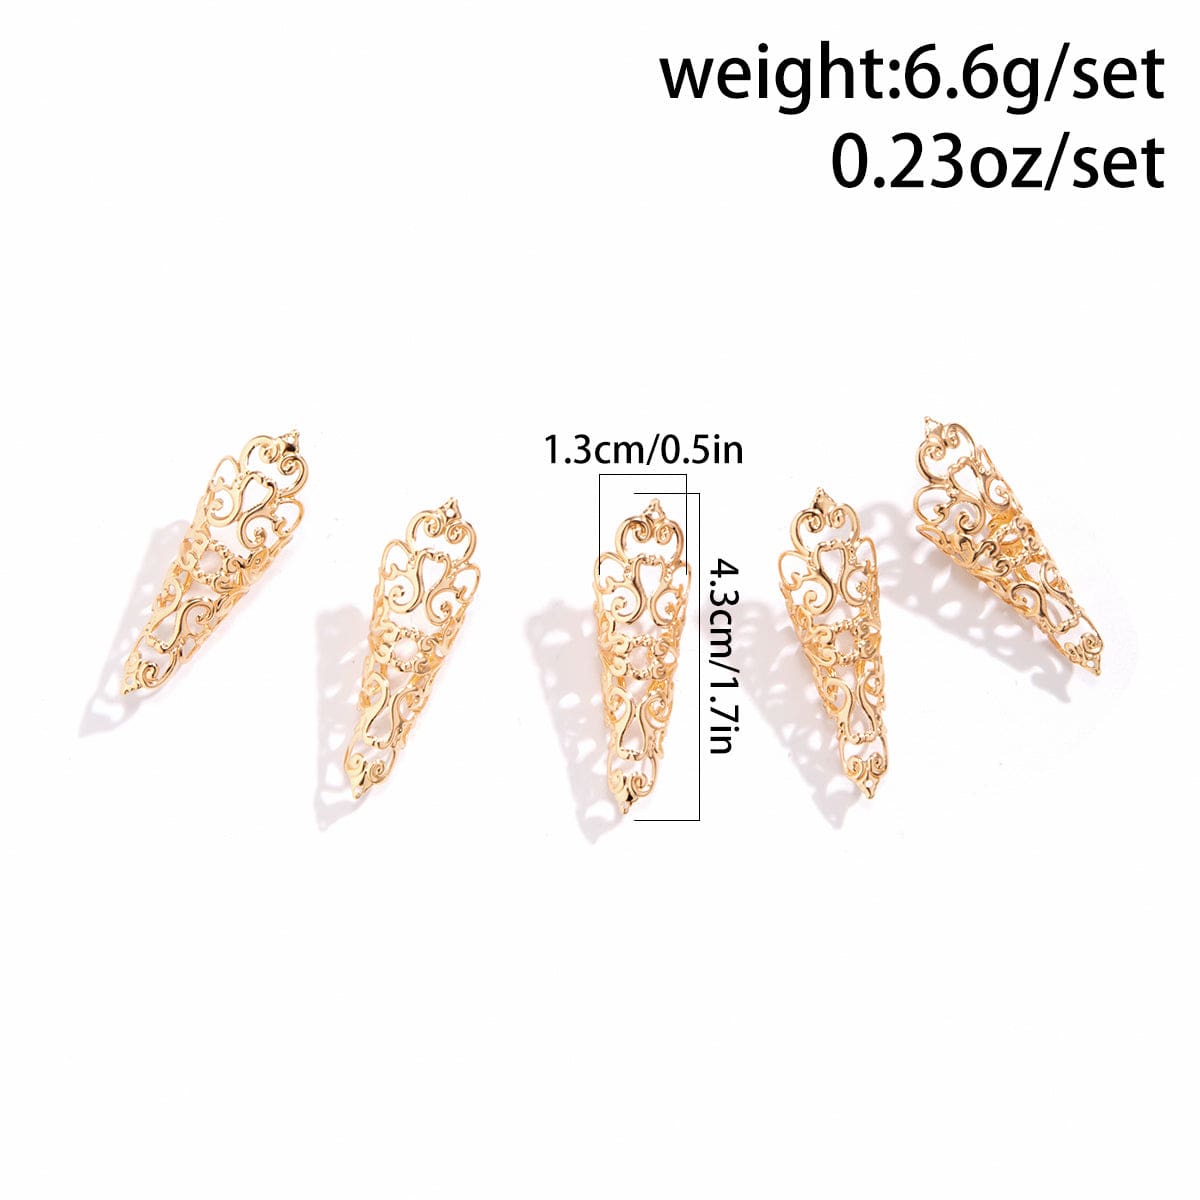 Gothic Gold Silver Plated Five Fingers Nails Ring Set - ArtGalleryZen